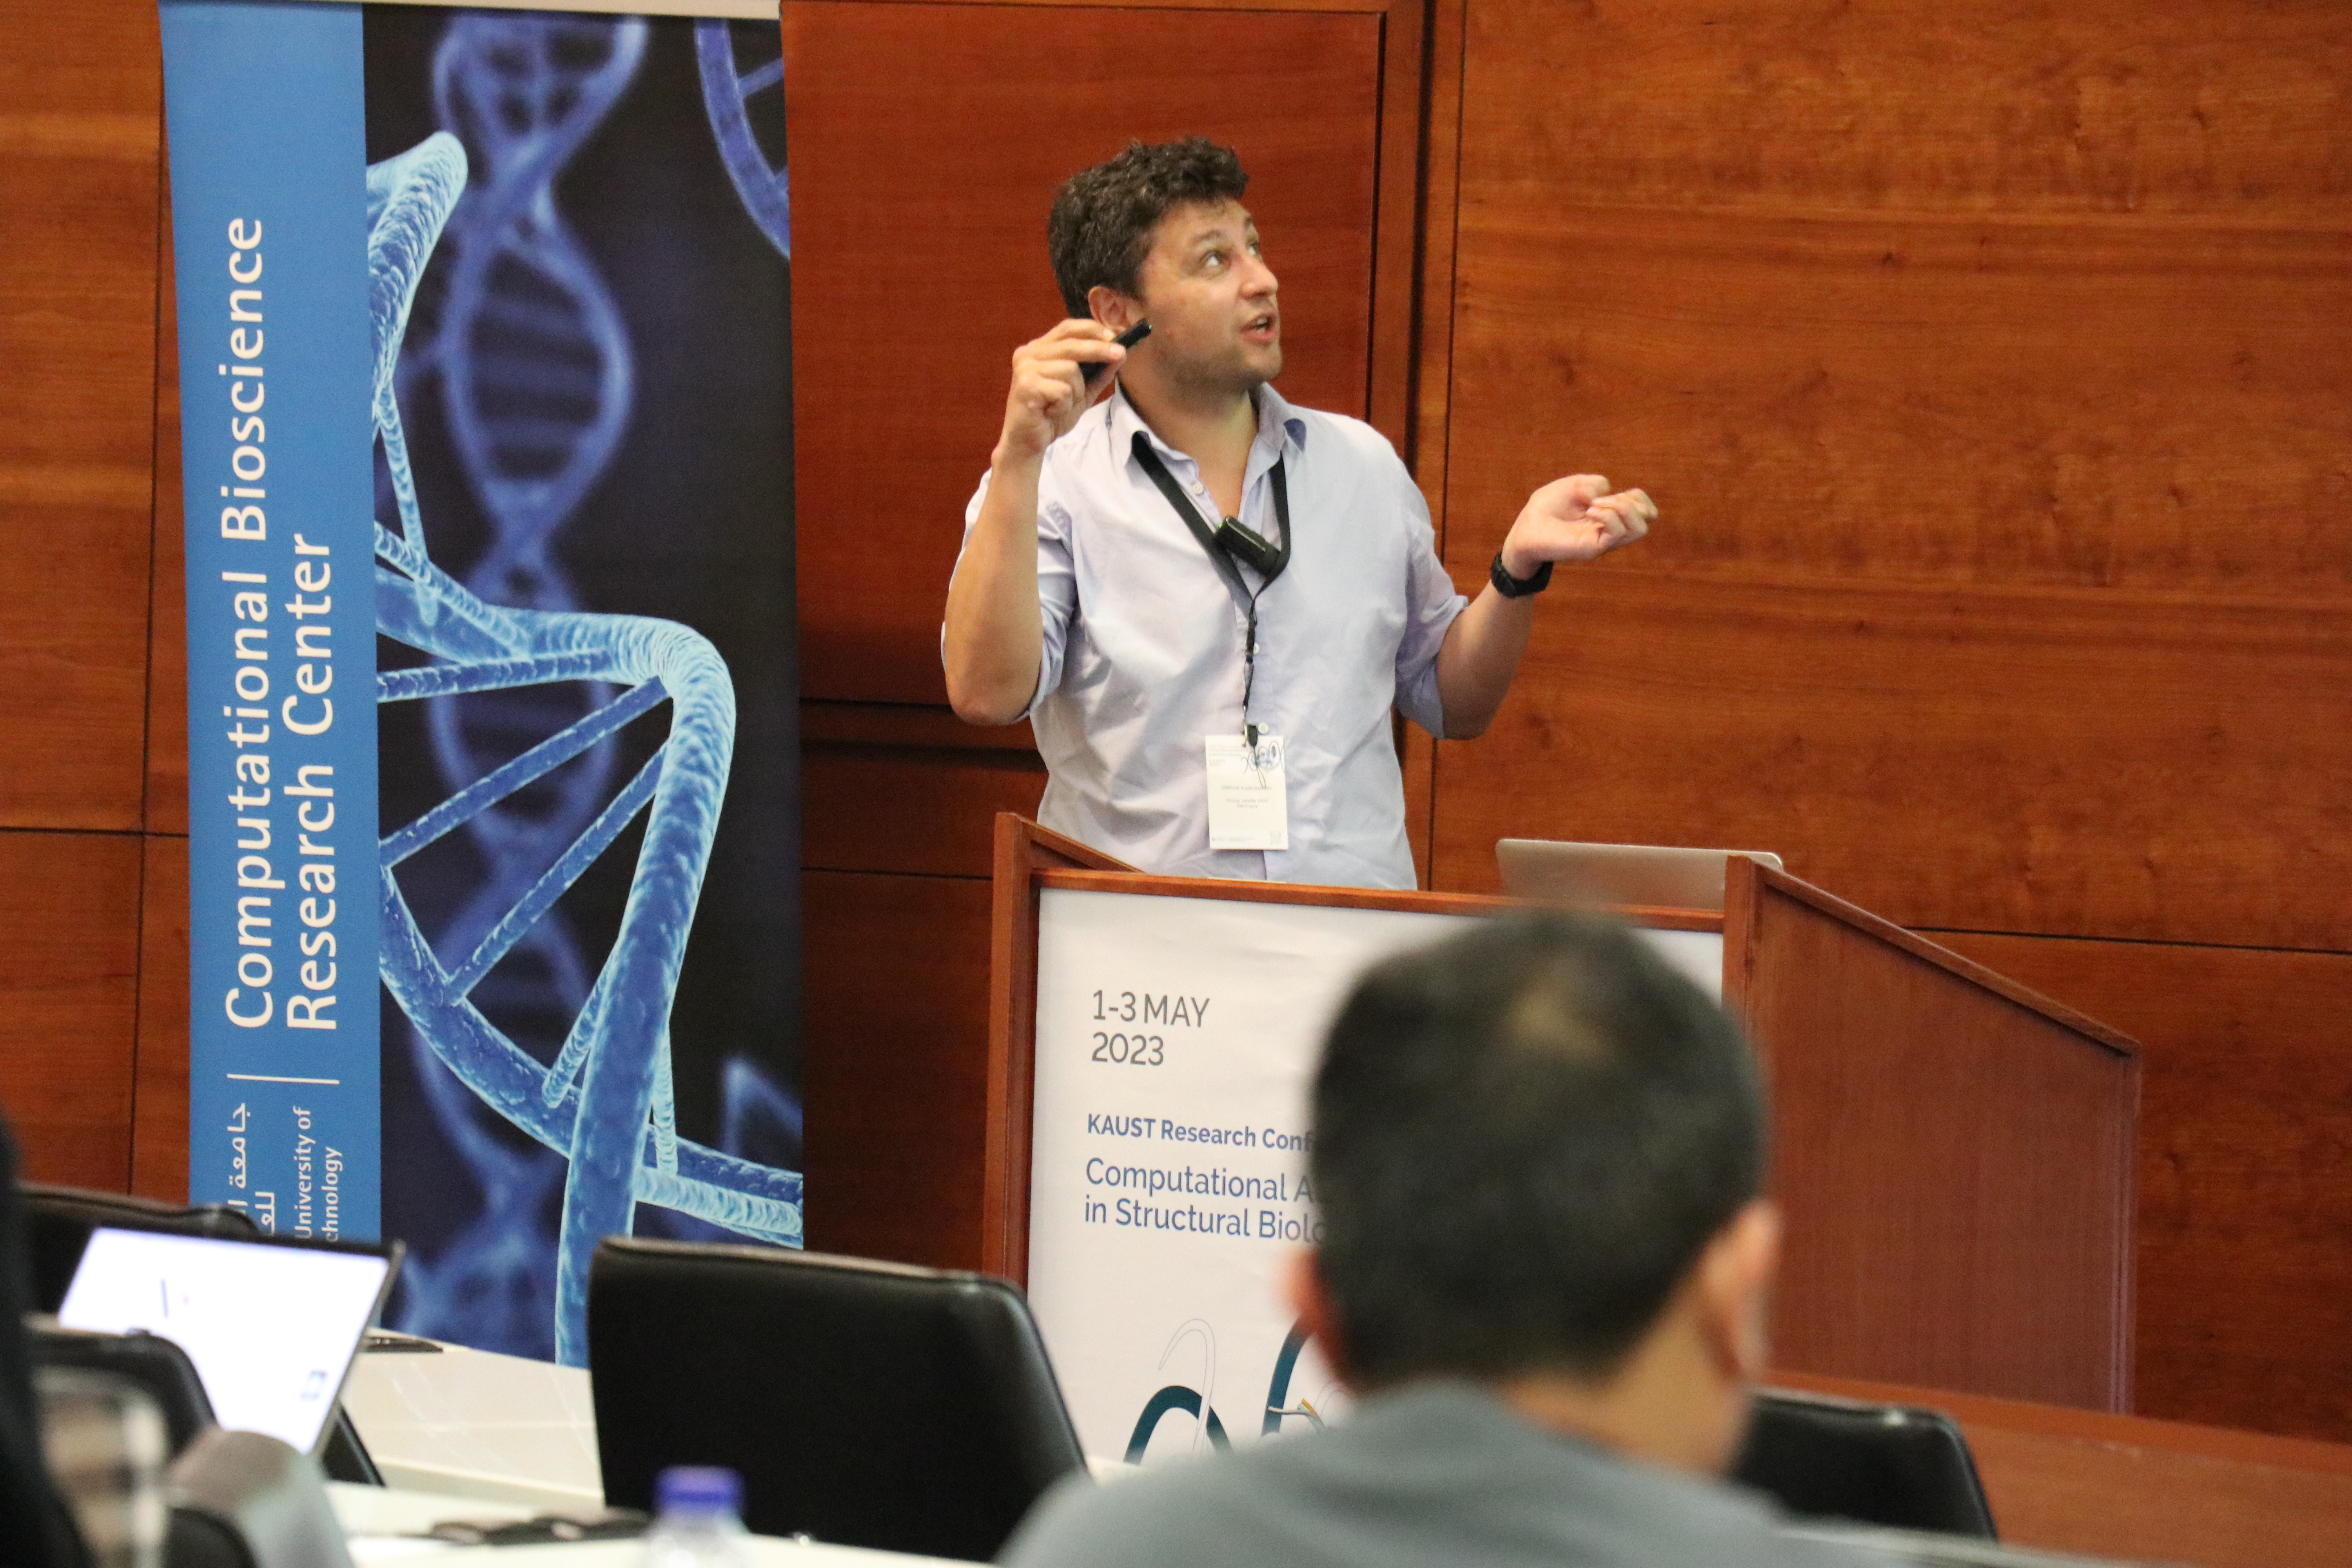 KAUST Research Conference on Computational Advances in Structural Biology